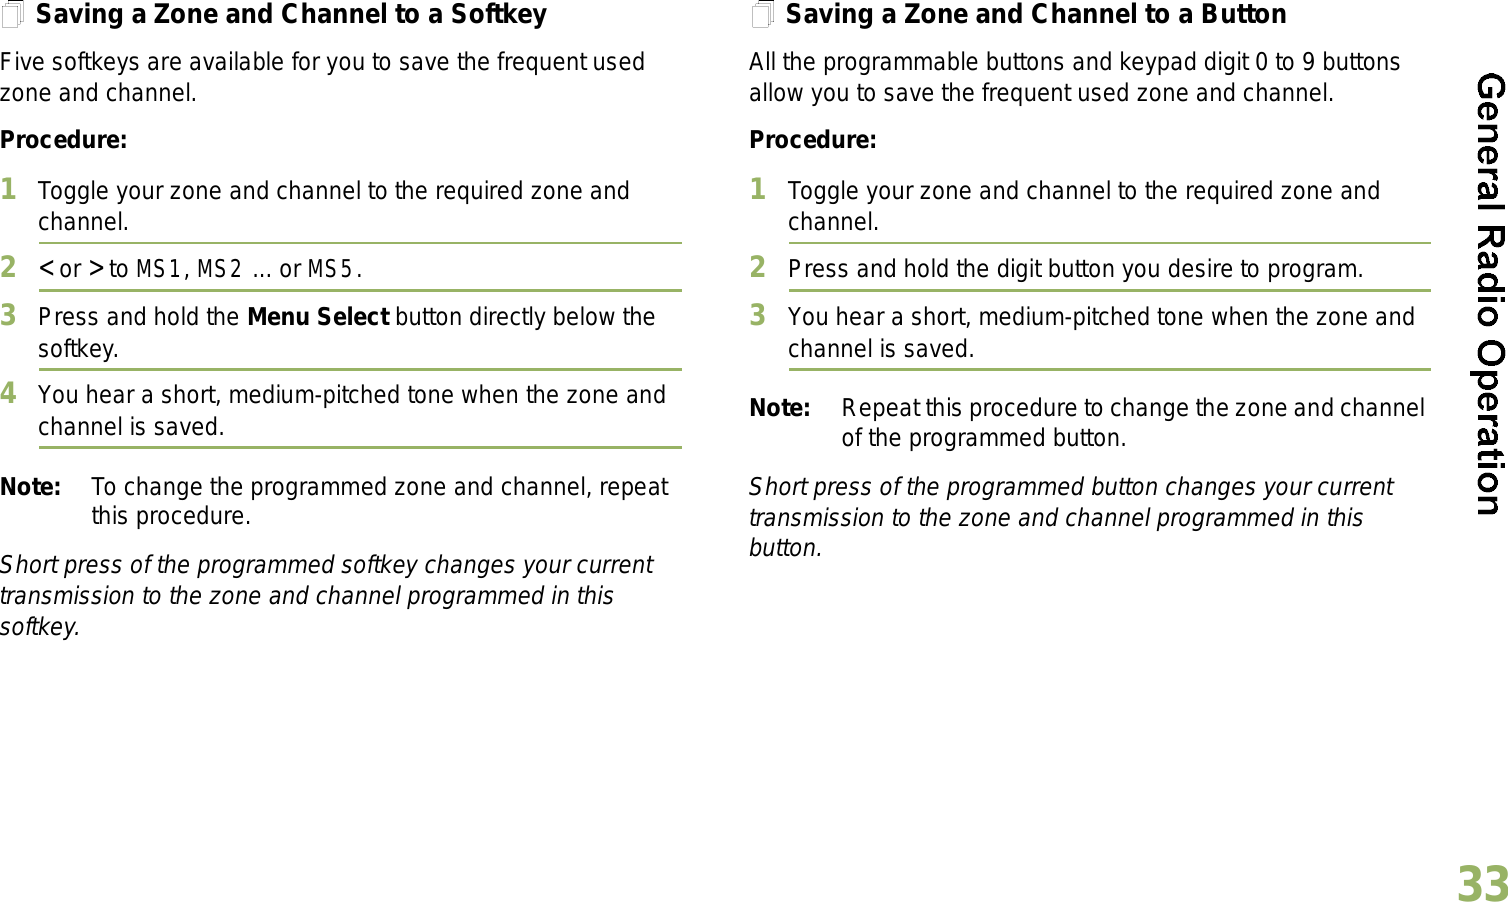 English33Saving a Zone and Channel to a SoftkeyFive softkeys are available for you to save the frequent used zone and channel. Procedure:1Toggle your zone and channel to the required zone and channel.2&lt; or &gt; to MS1, MS2 ... or MS5.3Press and hold the Menu Select button directly below the softkey.4You hear a short, medium-pitched tone when the zone and channel is saved.Note: To change the programmed zone and channel, repeat this procedure.Short press of the programmed softkey changes your current transmission to the zone and channel programmed in this softkey.Saving a Zone and Channel to a ButtonAll the programmable buttons and keypad digit 0 to 9 buttons allow you to save the frequent used zone and channel. Procedure:1Toggle your zone and channel to the required zone and channel.2Press and hold the digit button you desire to program.3You hear a short, medium-pitched tone when the zone and channel is saved.Note: Repeat this procedure to change the zone and channel of the programmed button.Short press of the programmed button changes your current transmission to the zone and channel programmed in this button.